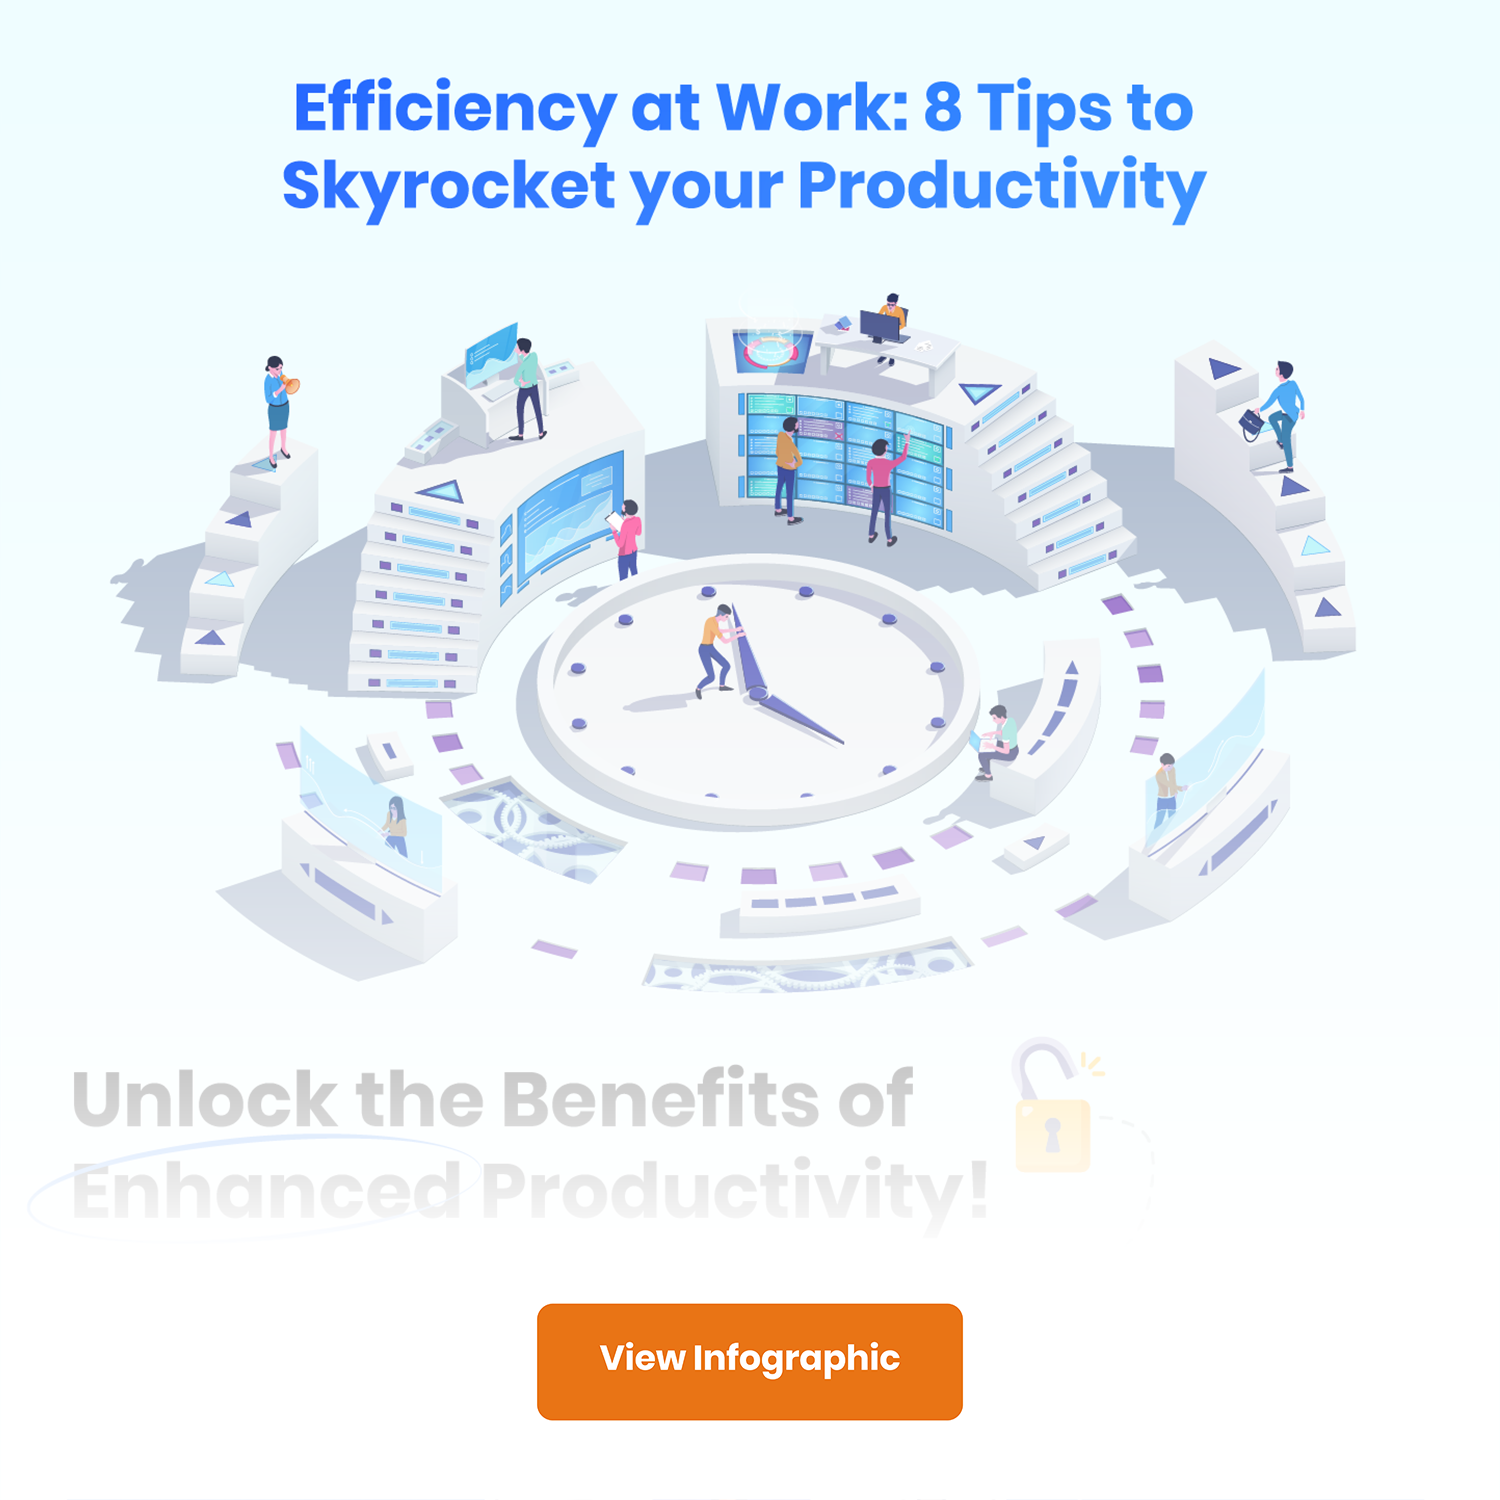 Efficiency at Work 8 Tips to Skyrocket Your Productivity - Infographic